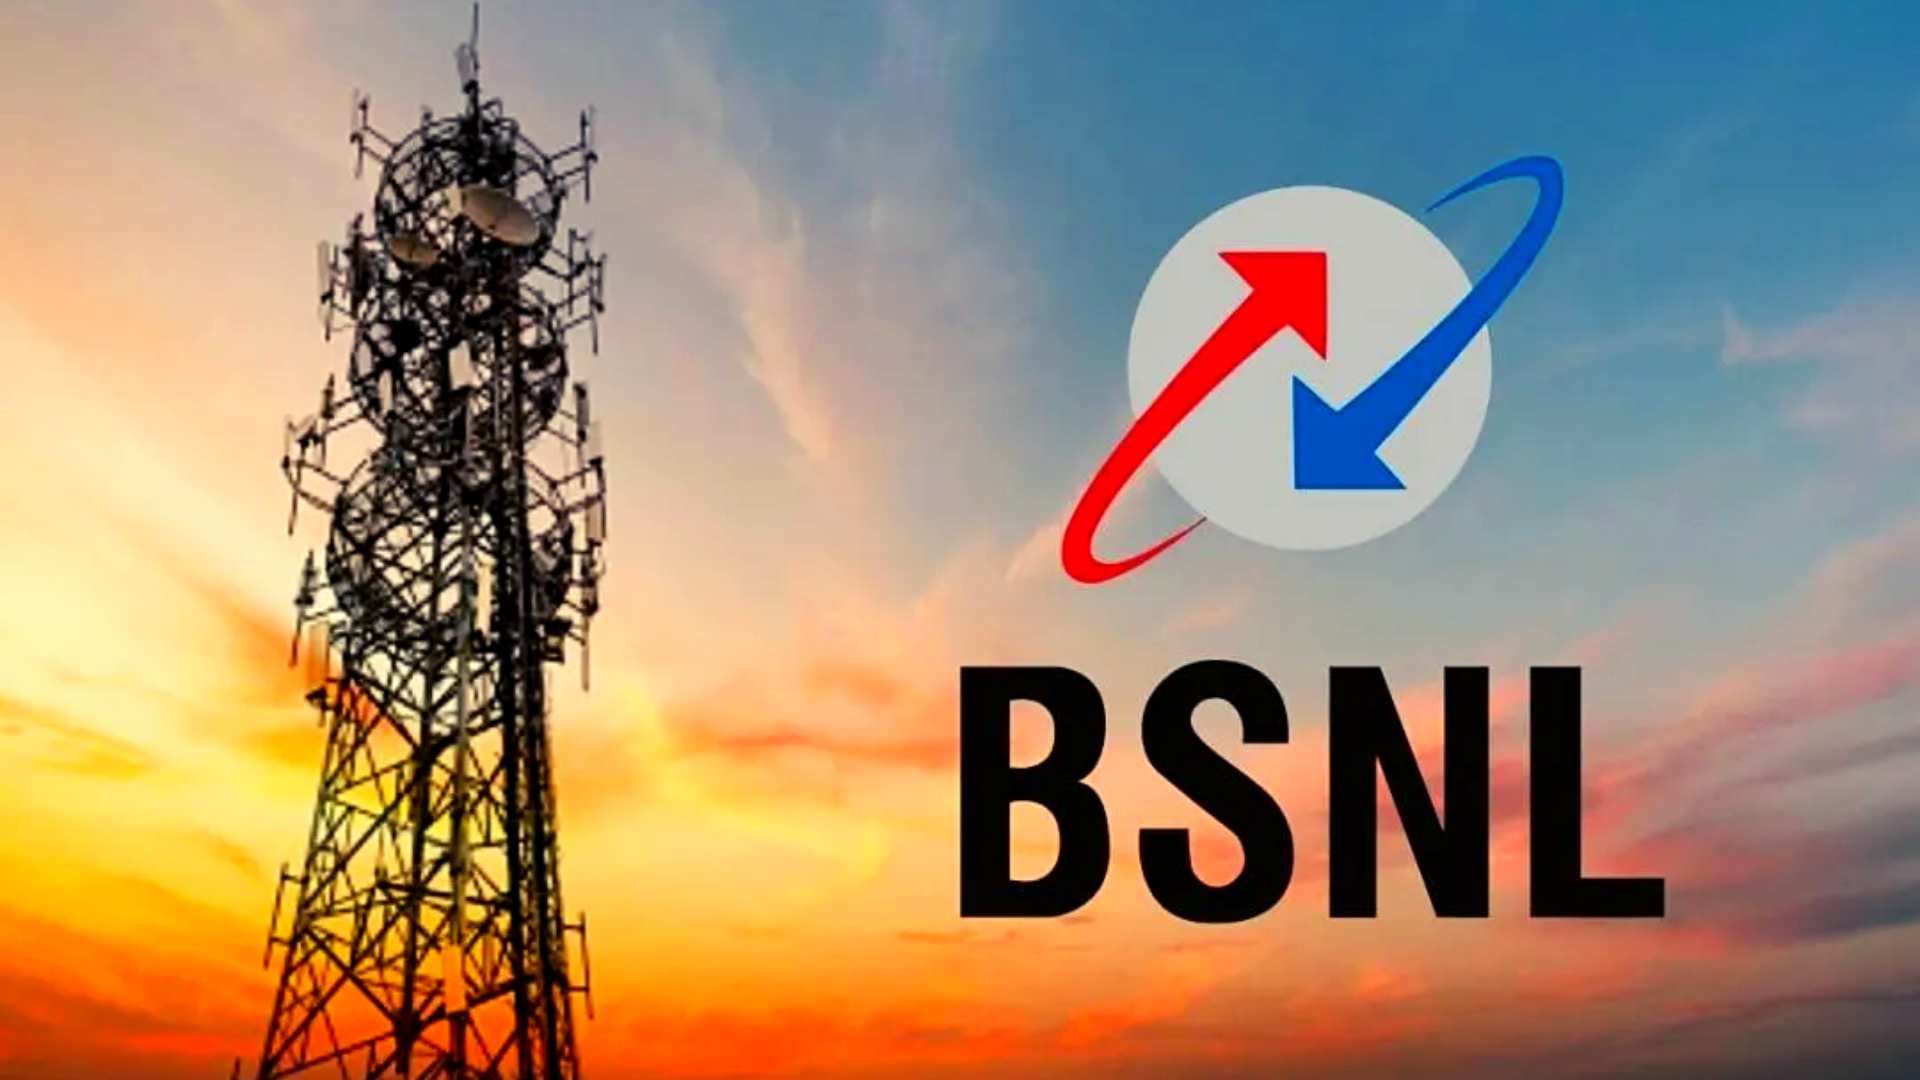 How to Block BSNL SIM Card in Minutes: Step-by-Step Instructions